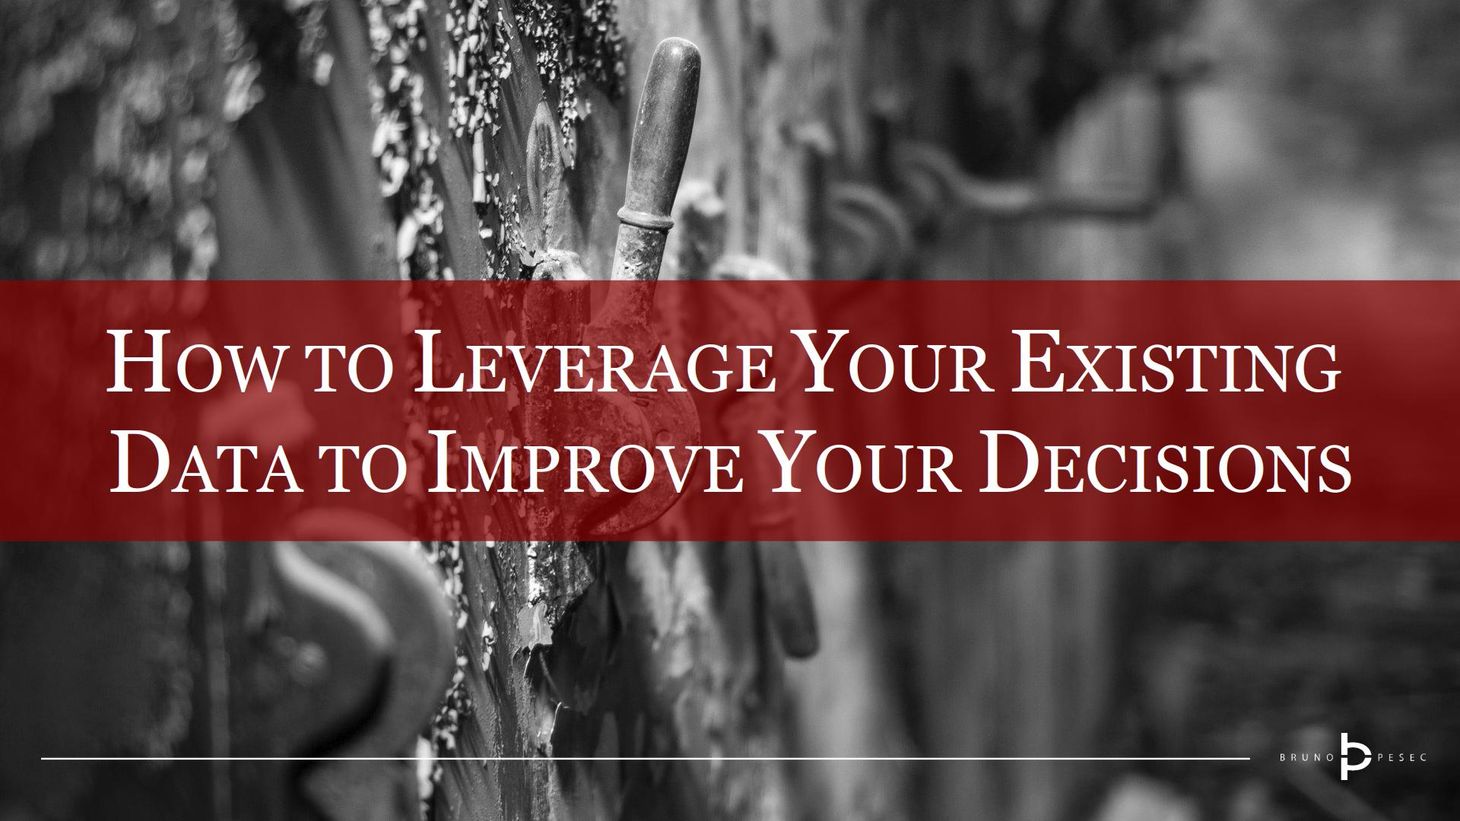 How to leverage your existing data to improve your decisions